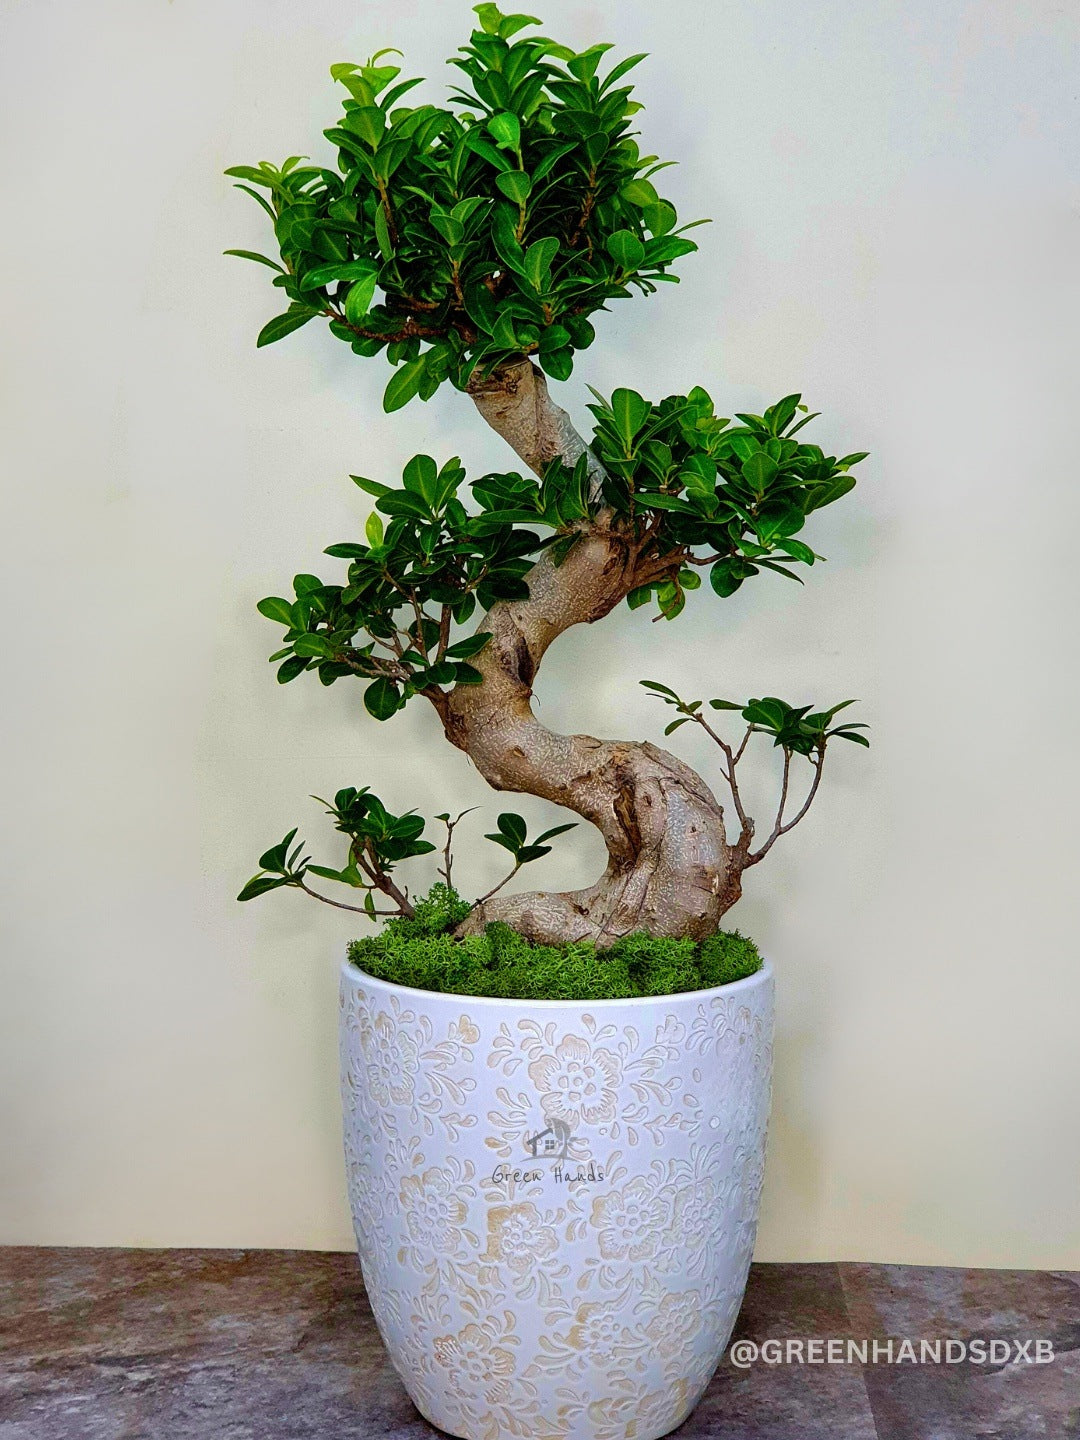 Potted S Bonsai Tree Planted in Earthy Wood Pot with Moss Topping